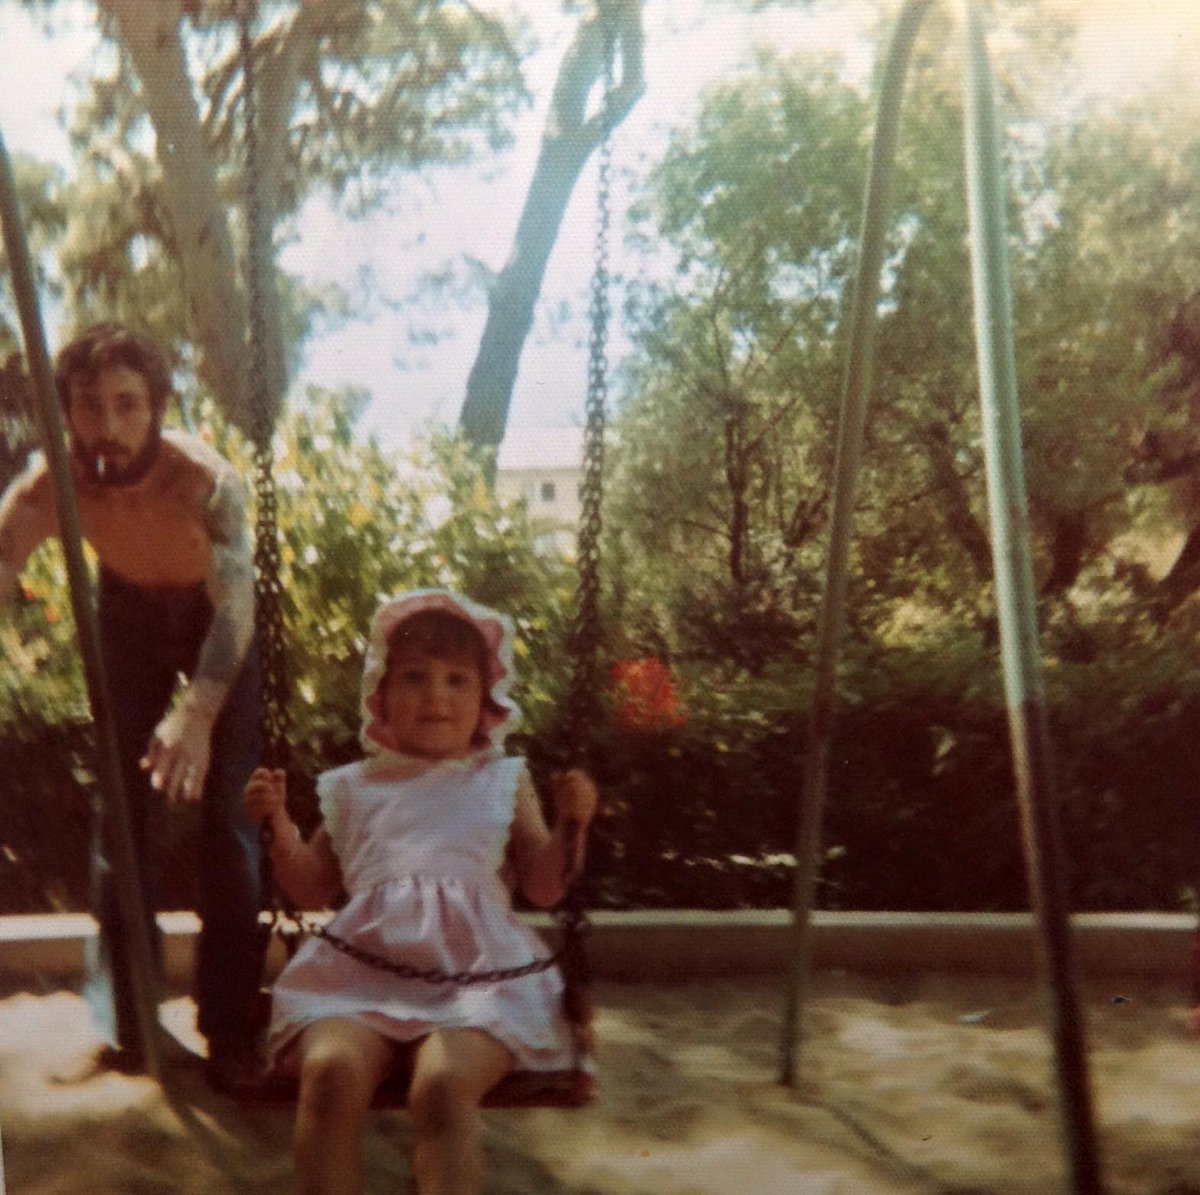 #bastfromthepast 1976 #alamedagardens with my daughter. So looking forward 2finally returning 2  #Gibraltar in 2020 & bringing my book.Past 18 months have been a challenge but finally have a buyer 4 my house and can start living again.Hopefully b there for my birthday & #MedSteps